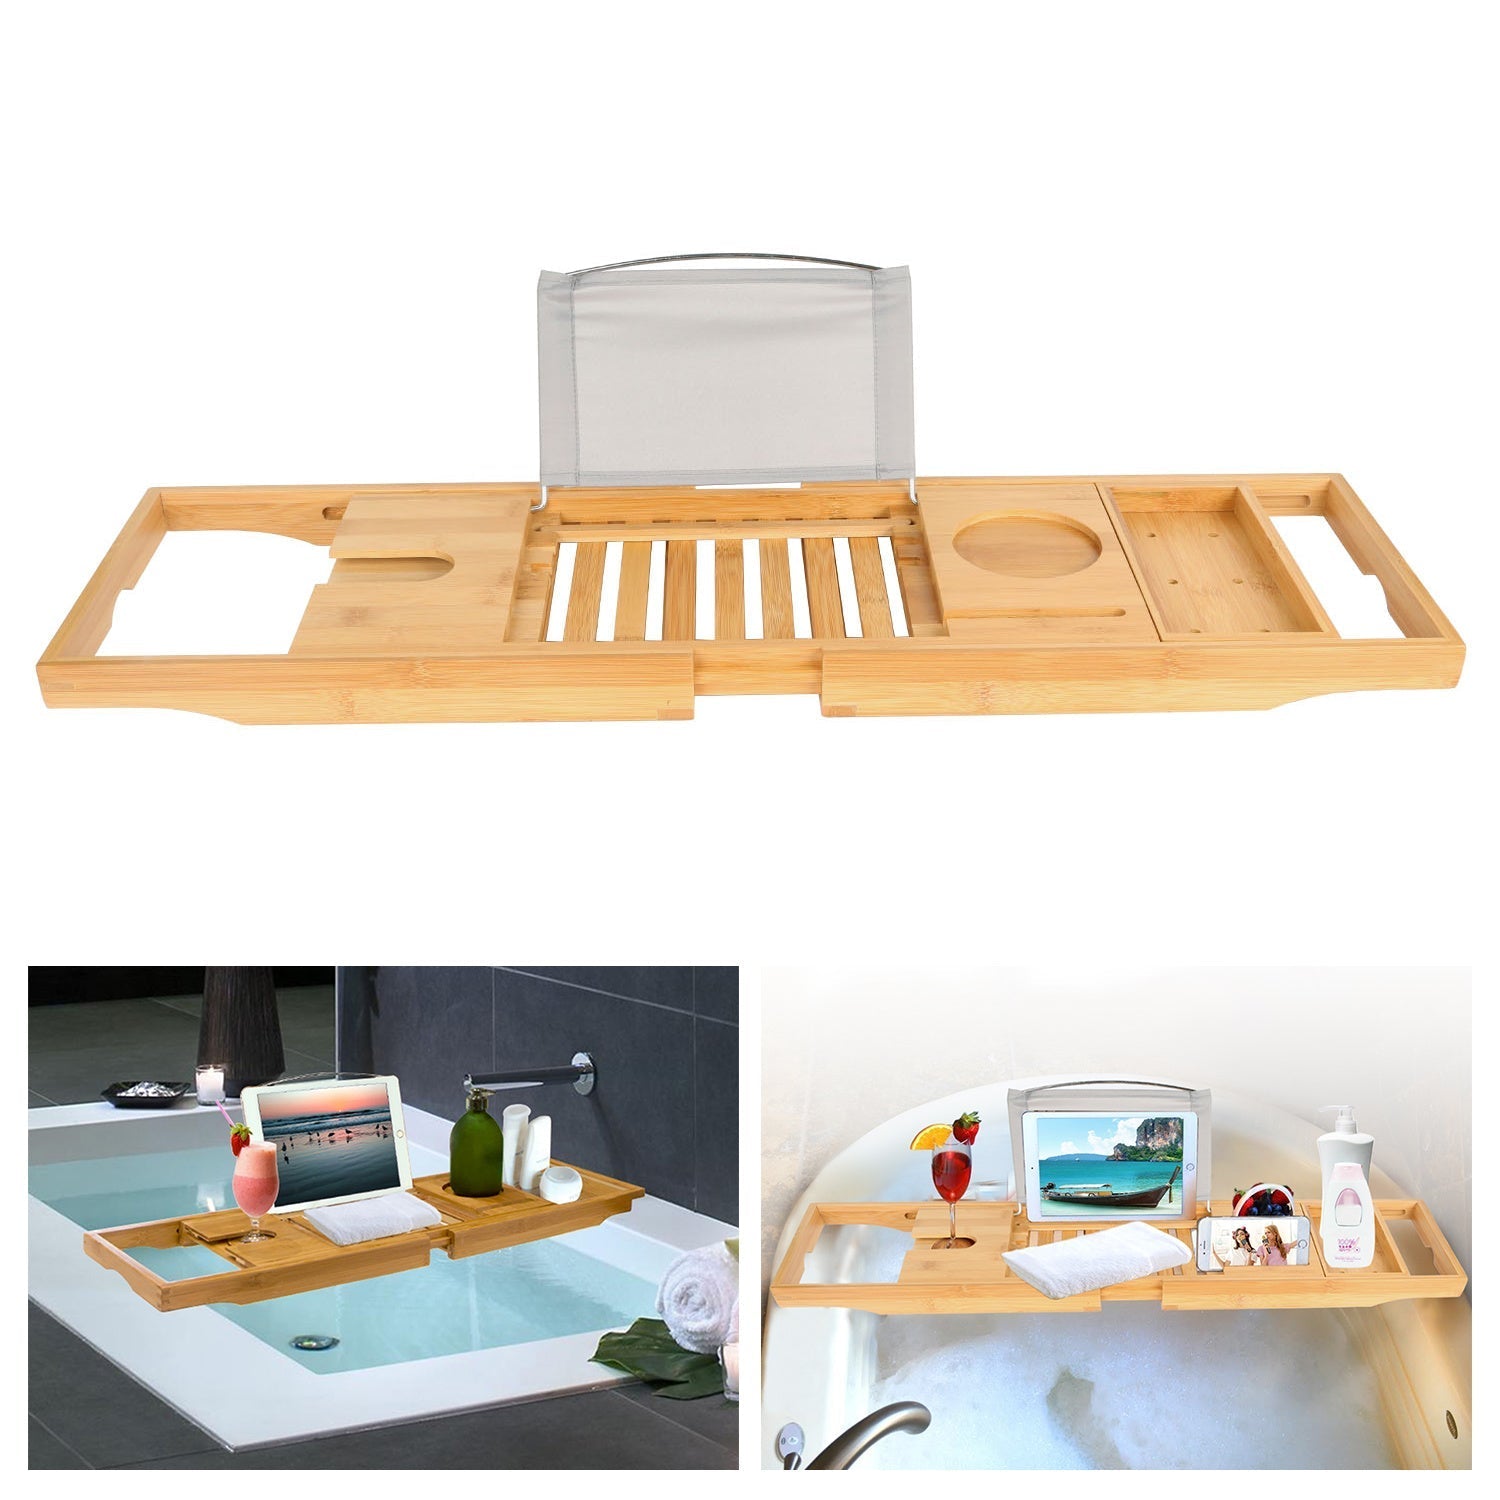 Bathtub Caddy Tray Crafted Bamboo Bath Tray Table Extendable Reading - ShopElegancyFurnitureBambooBathtub Caddy Tray Crafted Bamboo Bath Tray Table Extendable Reading